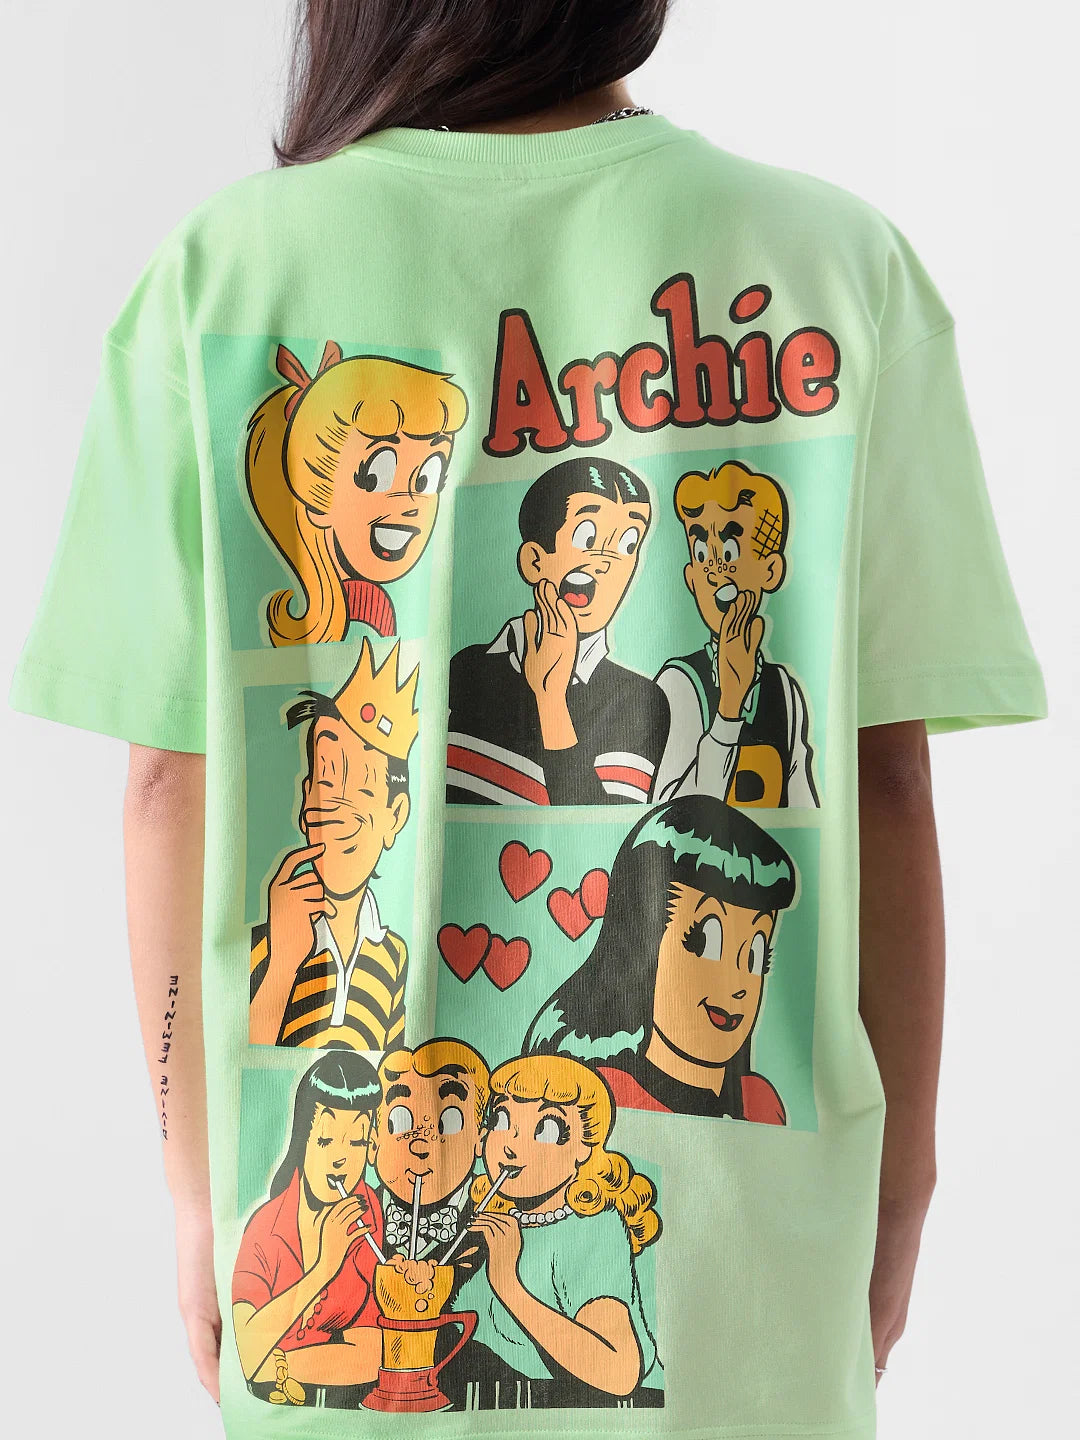 Archie The Gang (UK version)